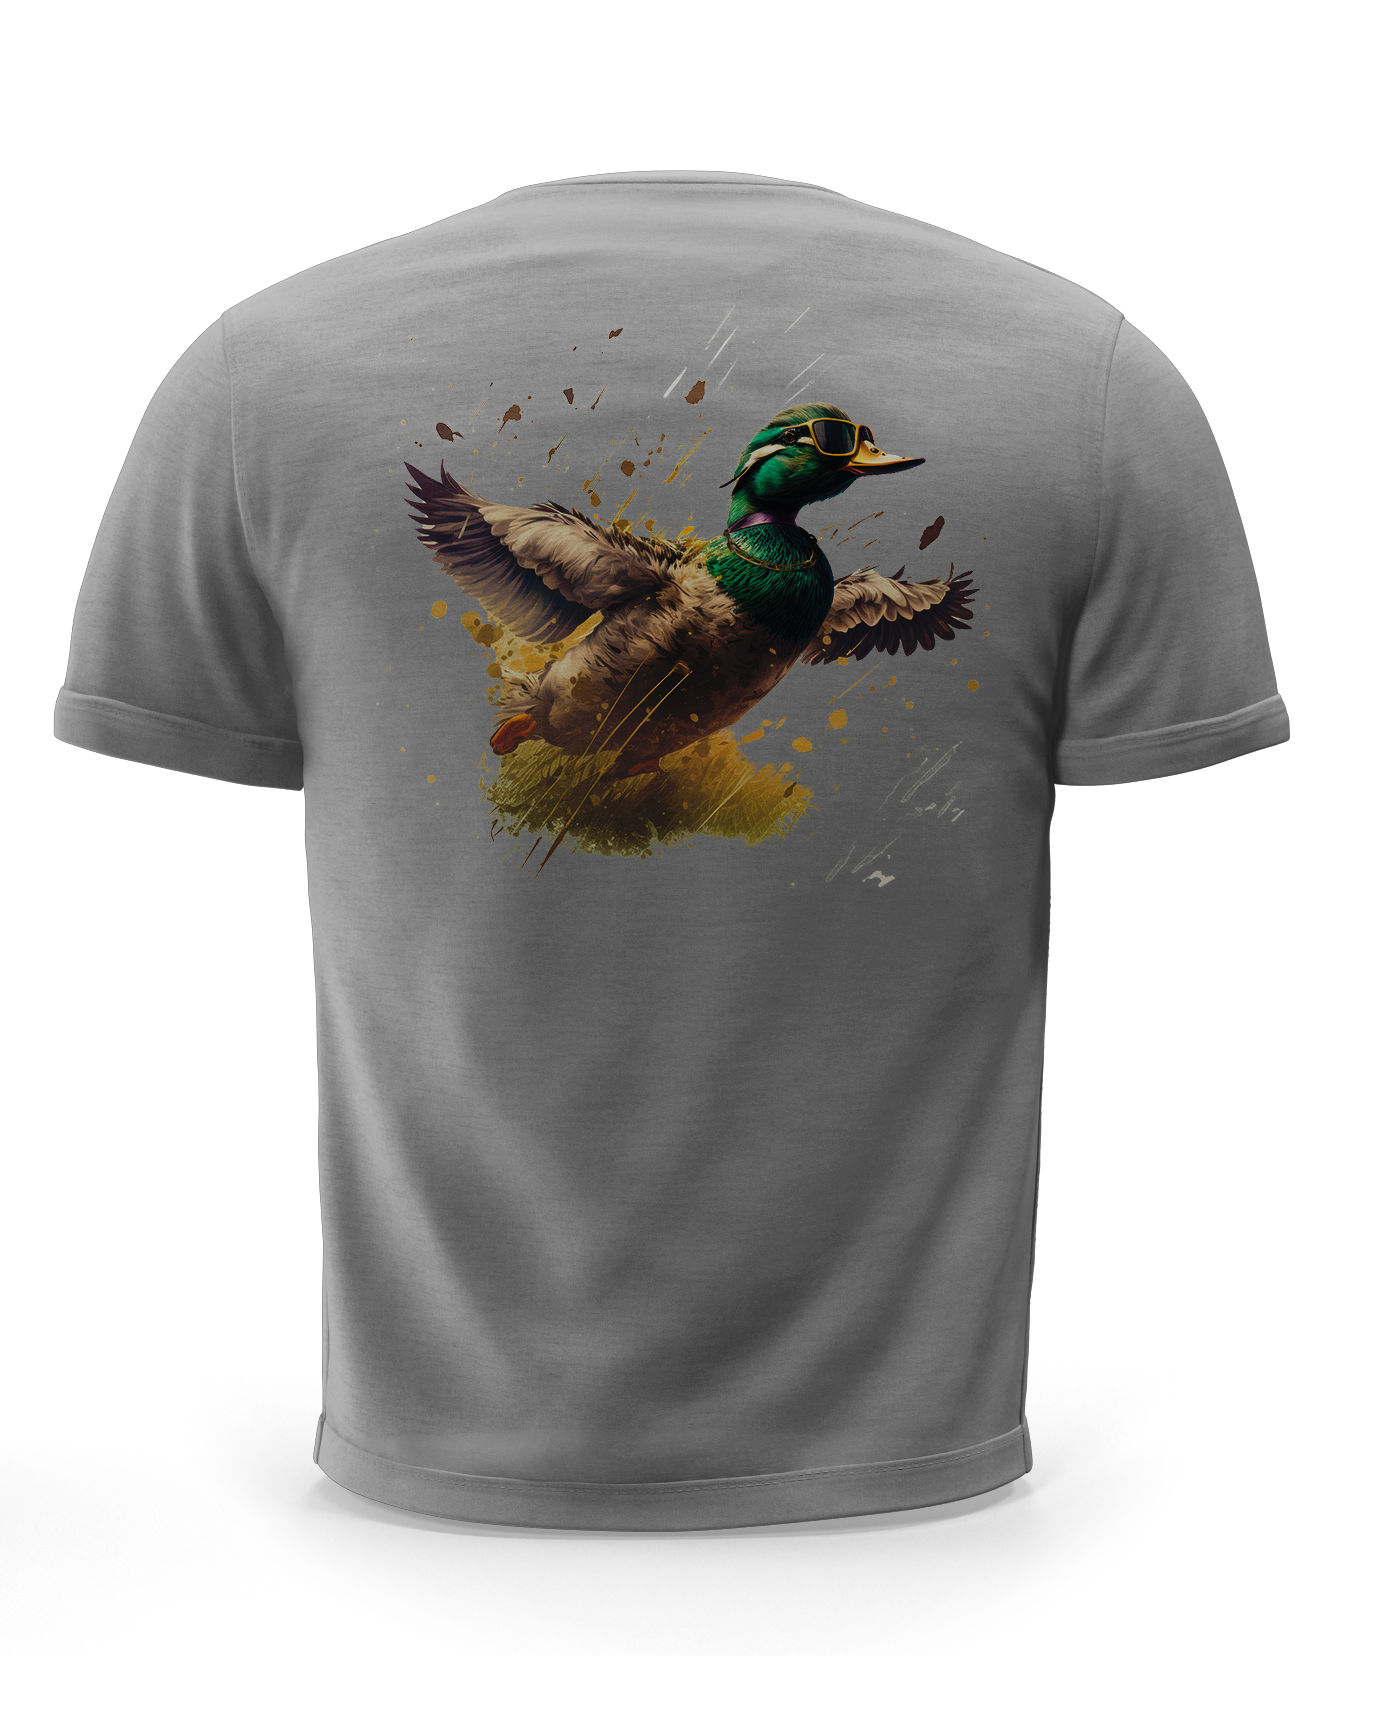 Fly High T-Shirt (3 Colors Available)